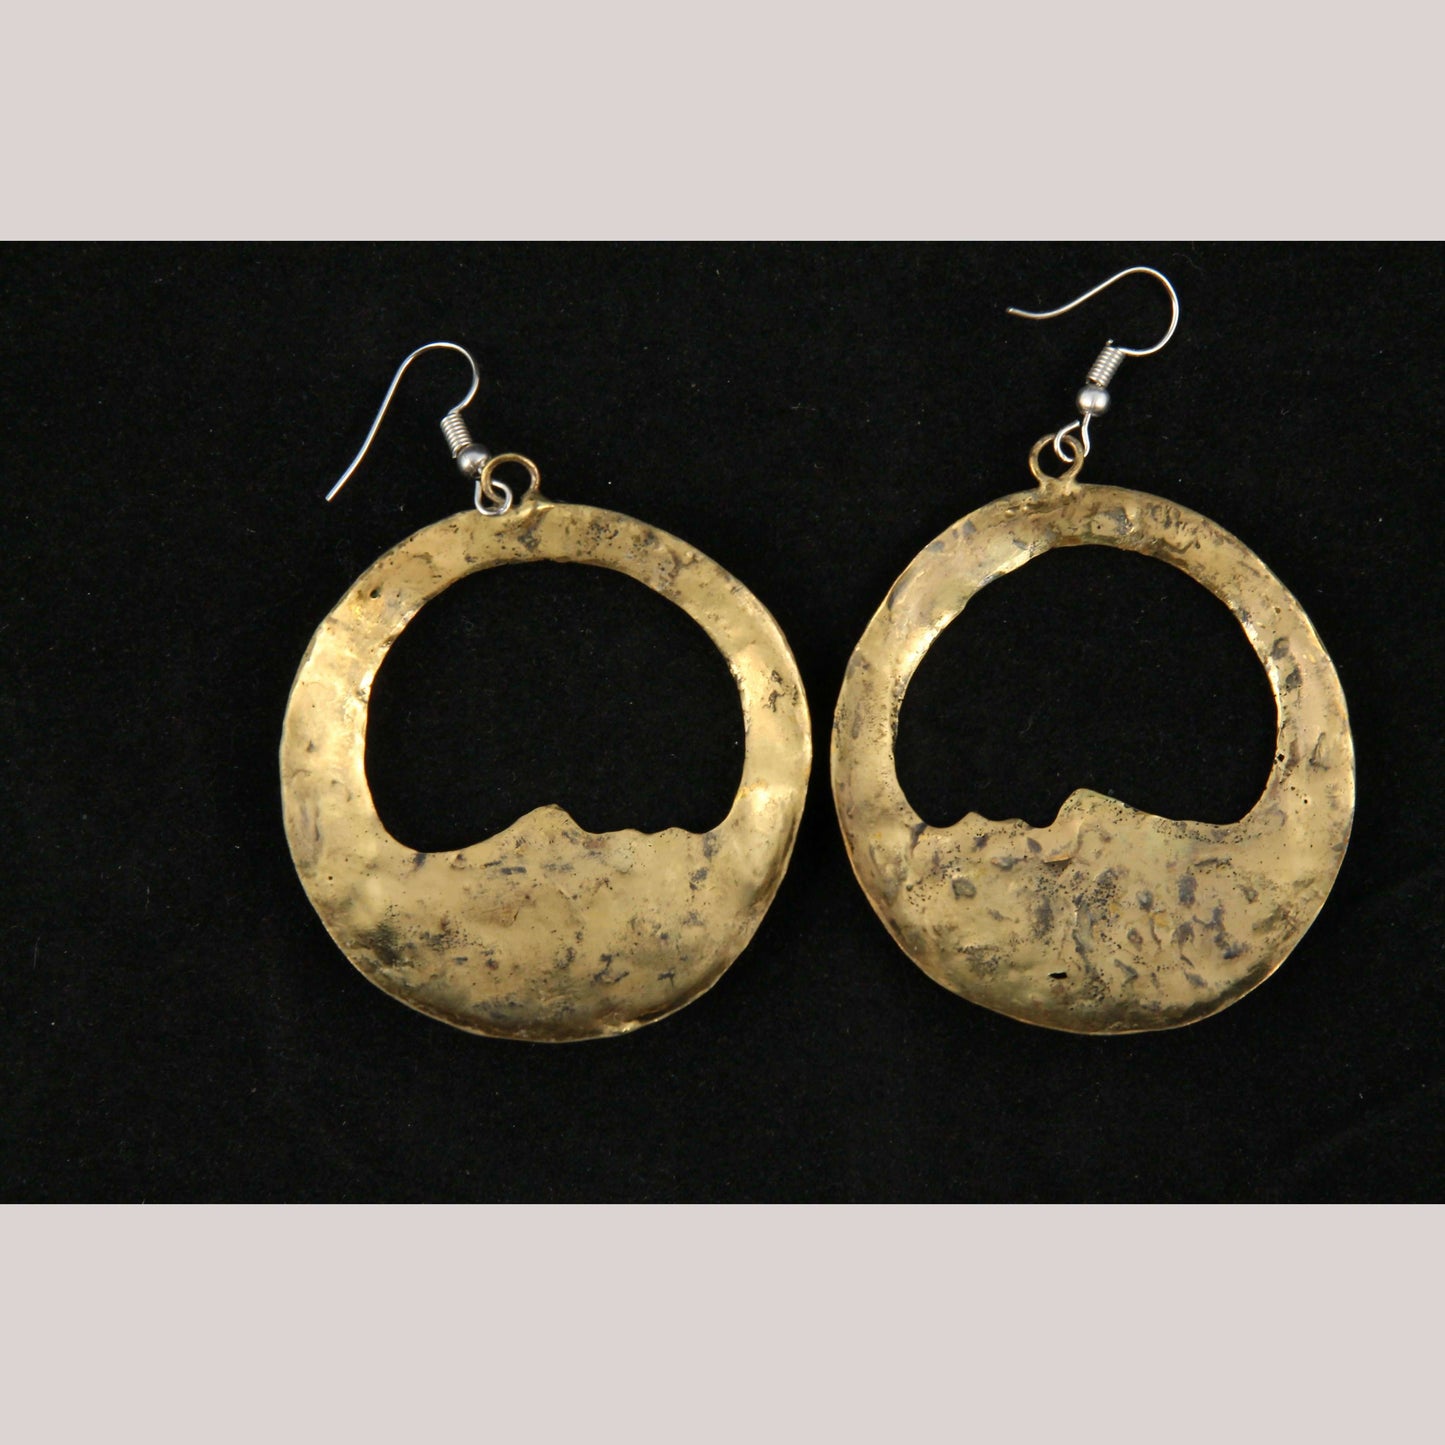 Hand Crafted Earrings Jewelry Mexican Folk Wearable Art Bronze Ethnic Moon Face